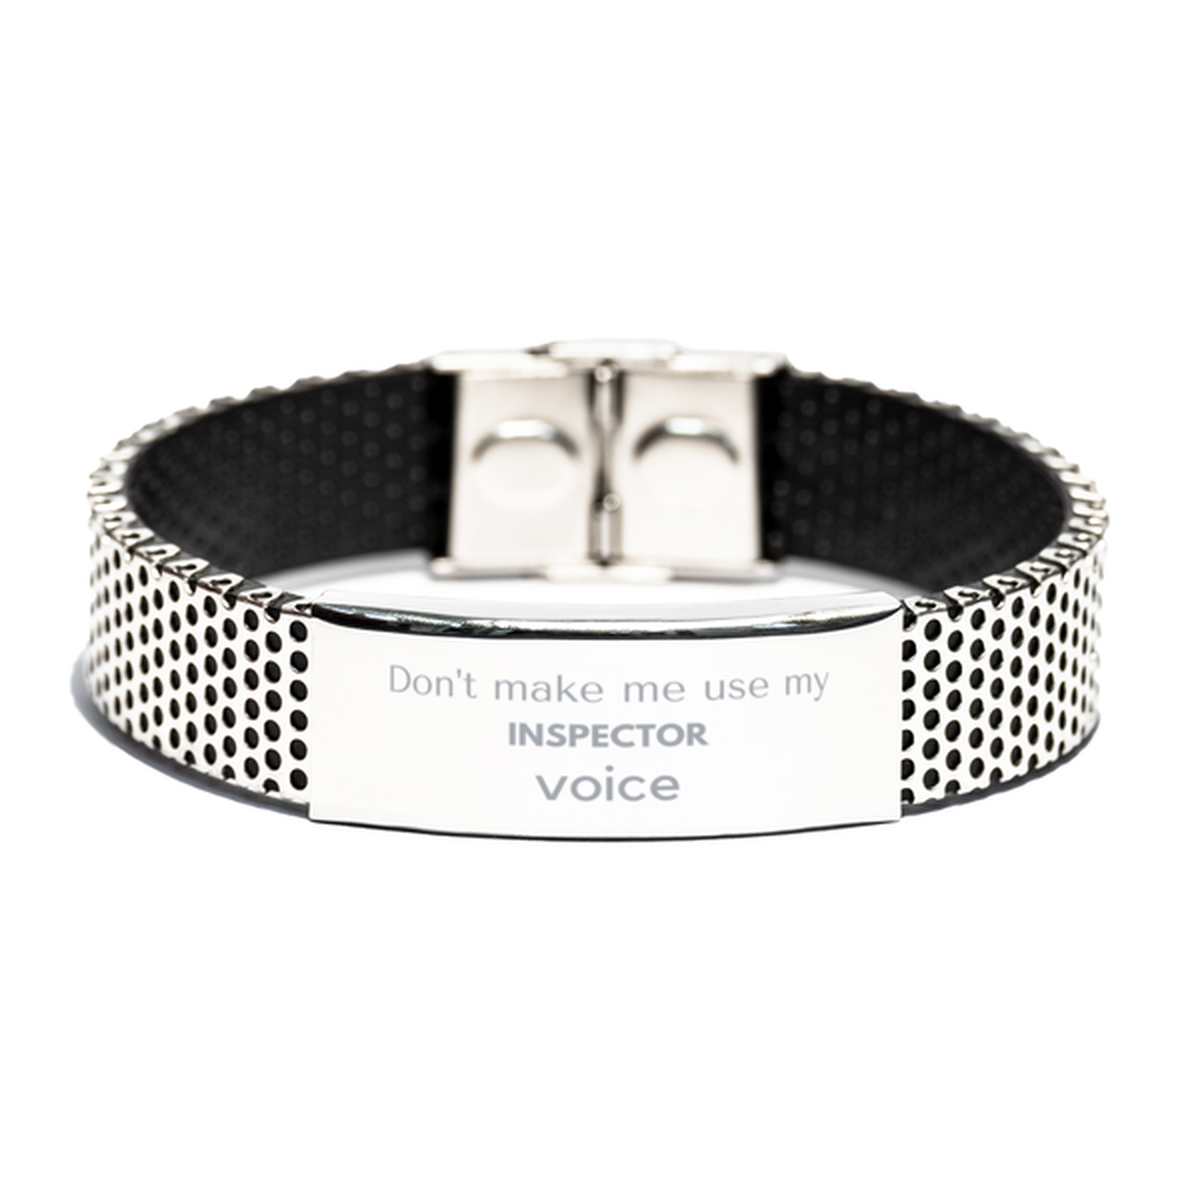 Don't make me use my Inspector voice, Sarcasm Inspector Gifts, Christmas Inspector Stainless Steel Bracelet Birthday Unique Gifts For Inspector Coworkers, Men, Women, Colleague, Friends